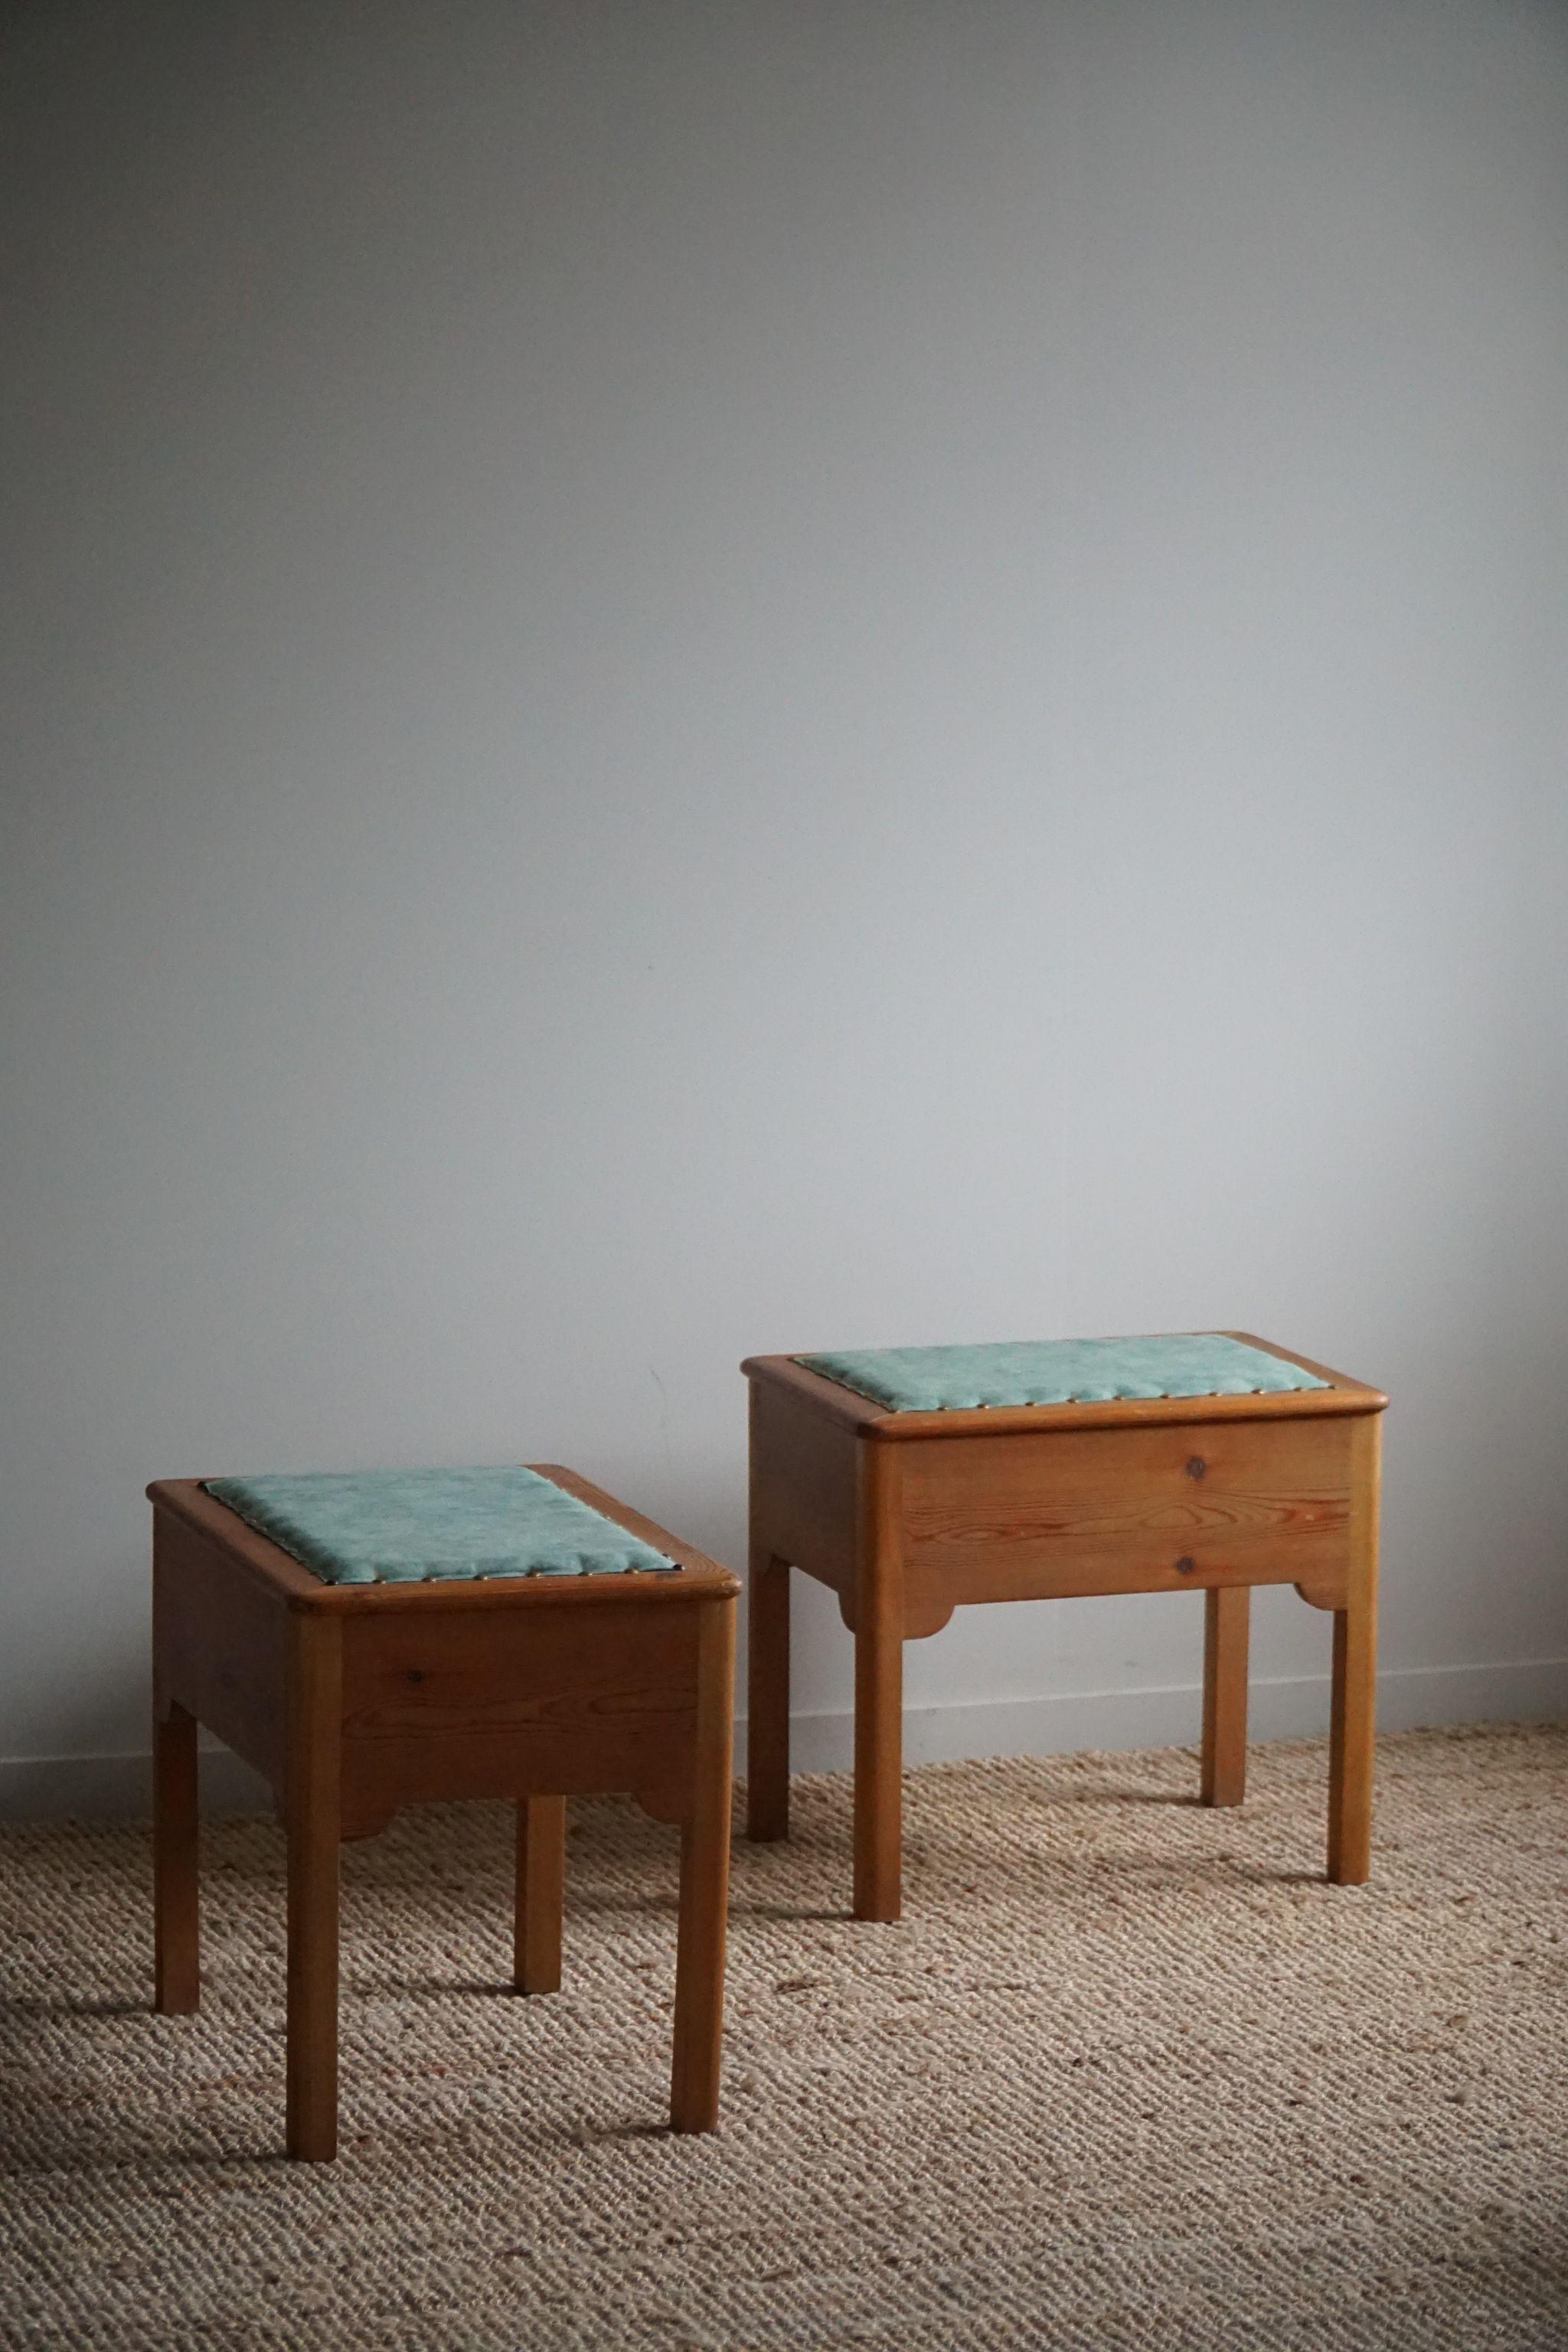 A Pair of Stools in Pine & Fabric with Storage, By a Swedish Cabinetmaker, 1950s For Sale 6